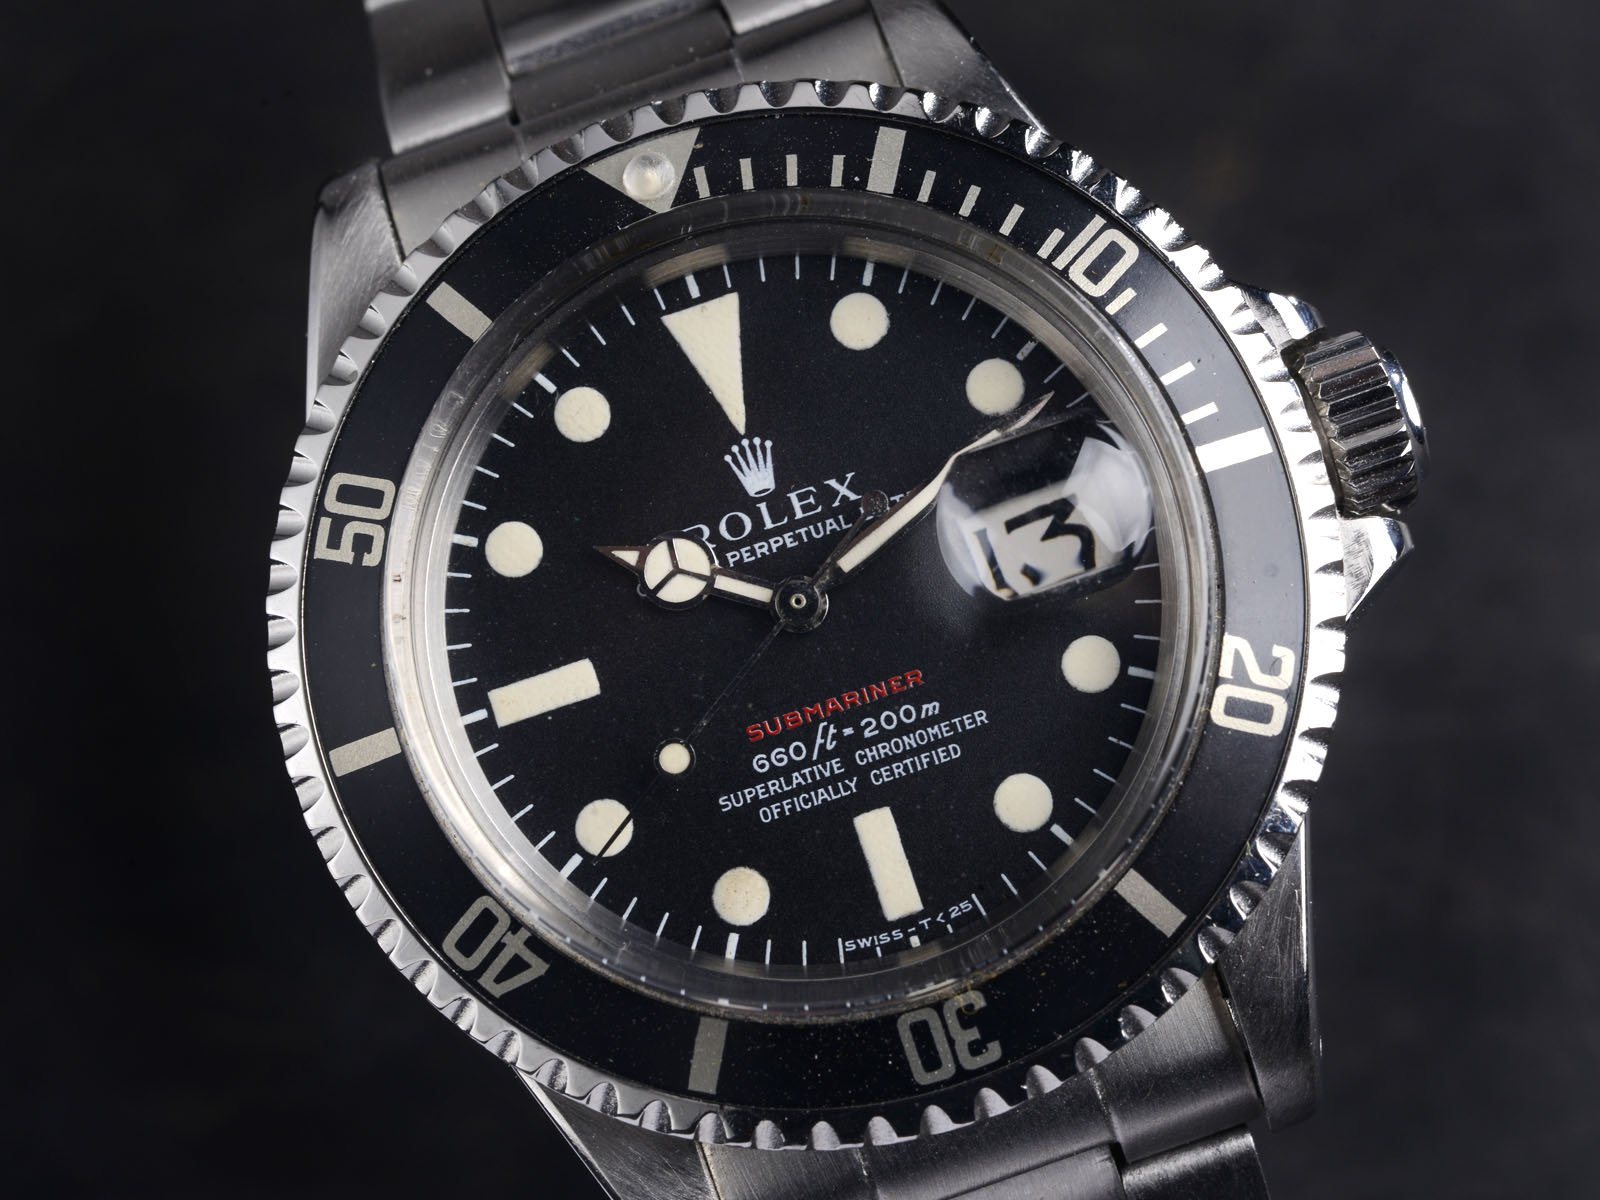 CURATED ROLEX 1680 RED SUBMARINER FROM 1970